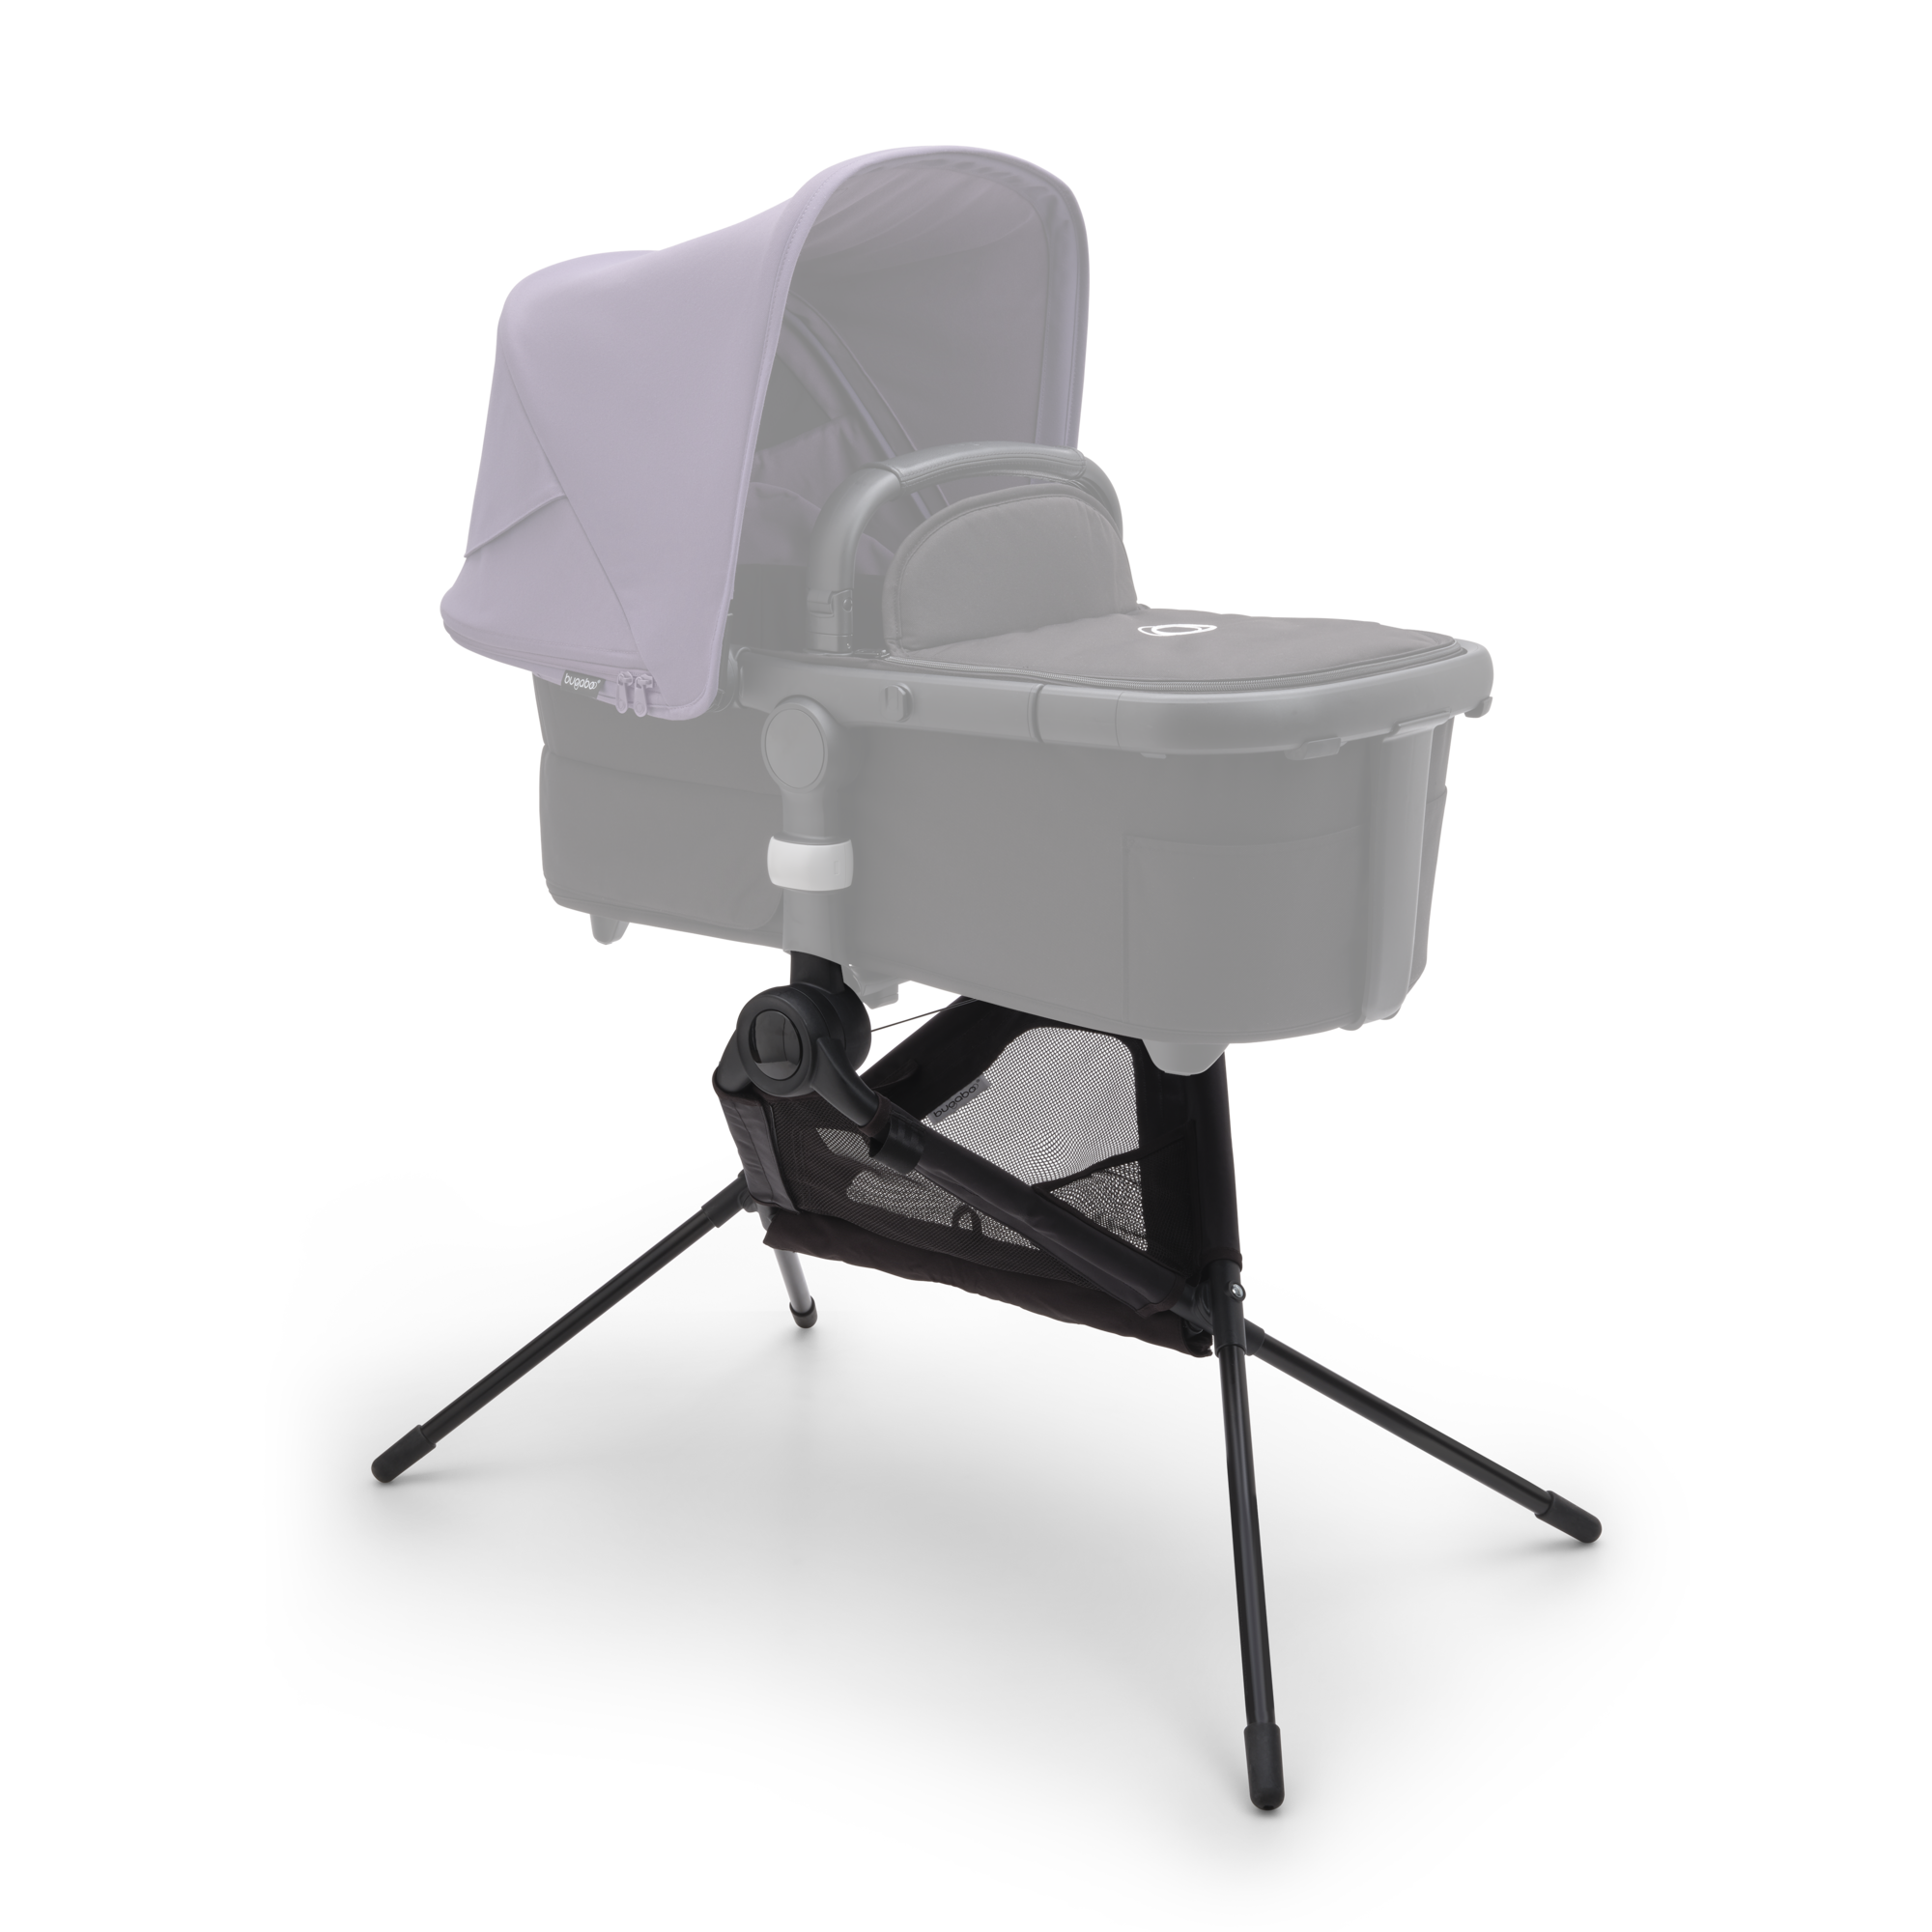 Bugaboo bassinet stand with Fox adapters